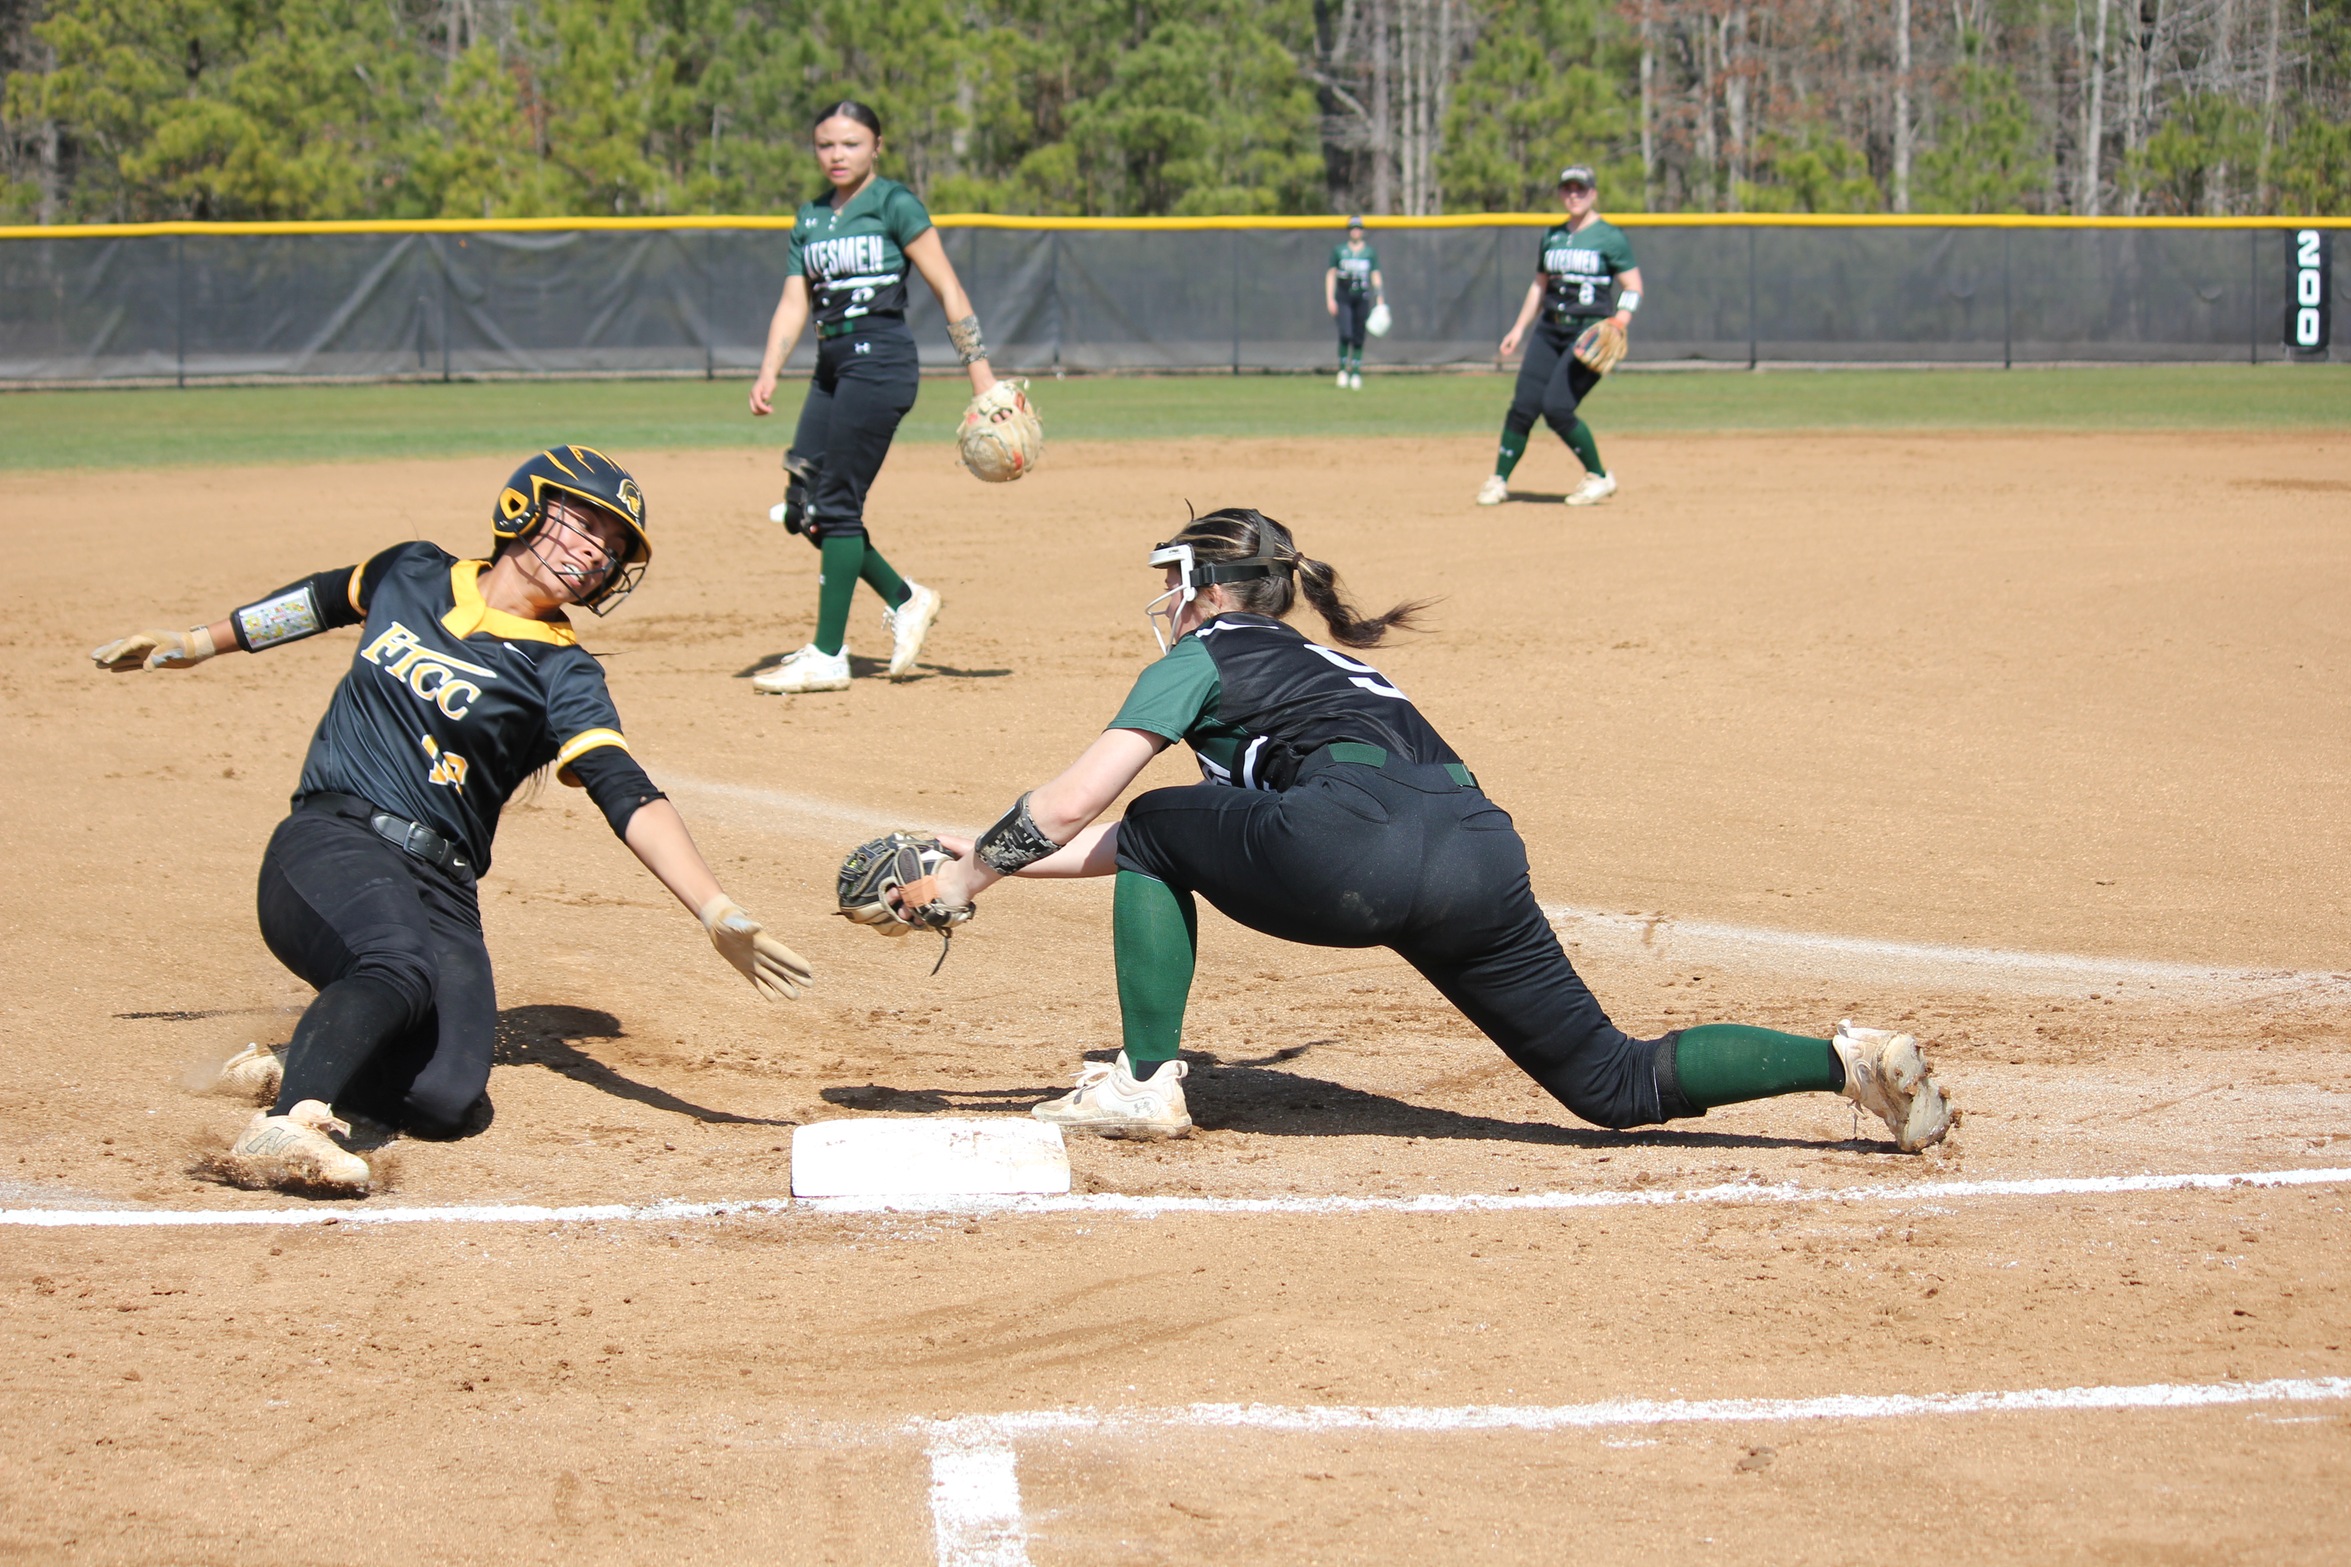 Softball Falls After Strong Showing by Hurricanes